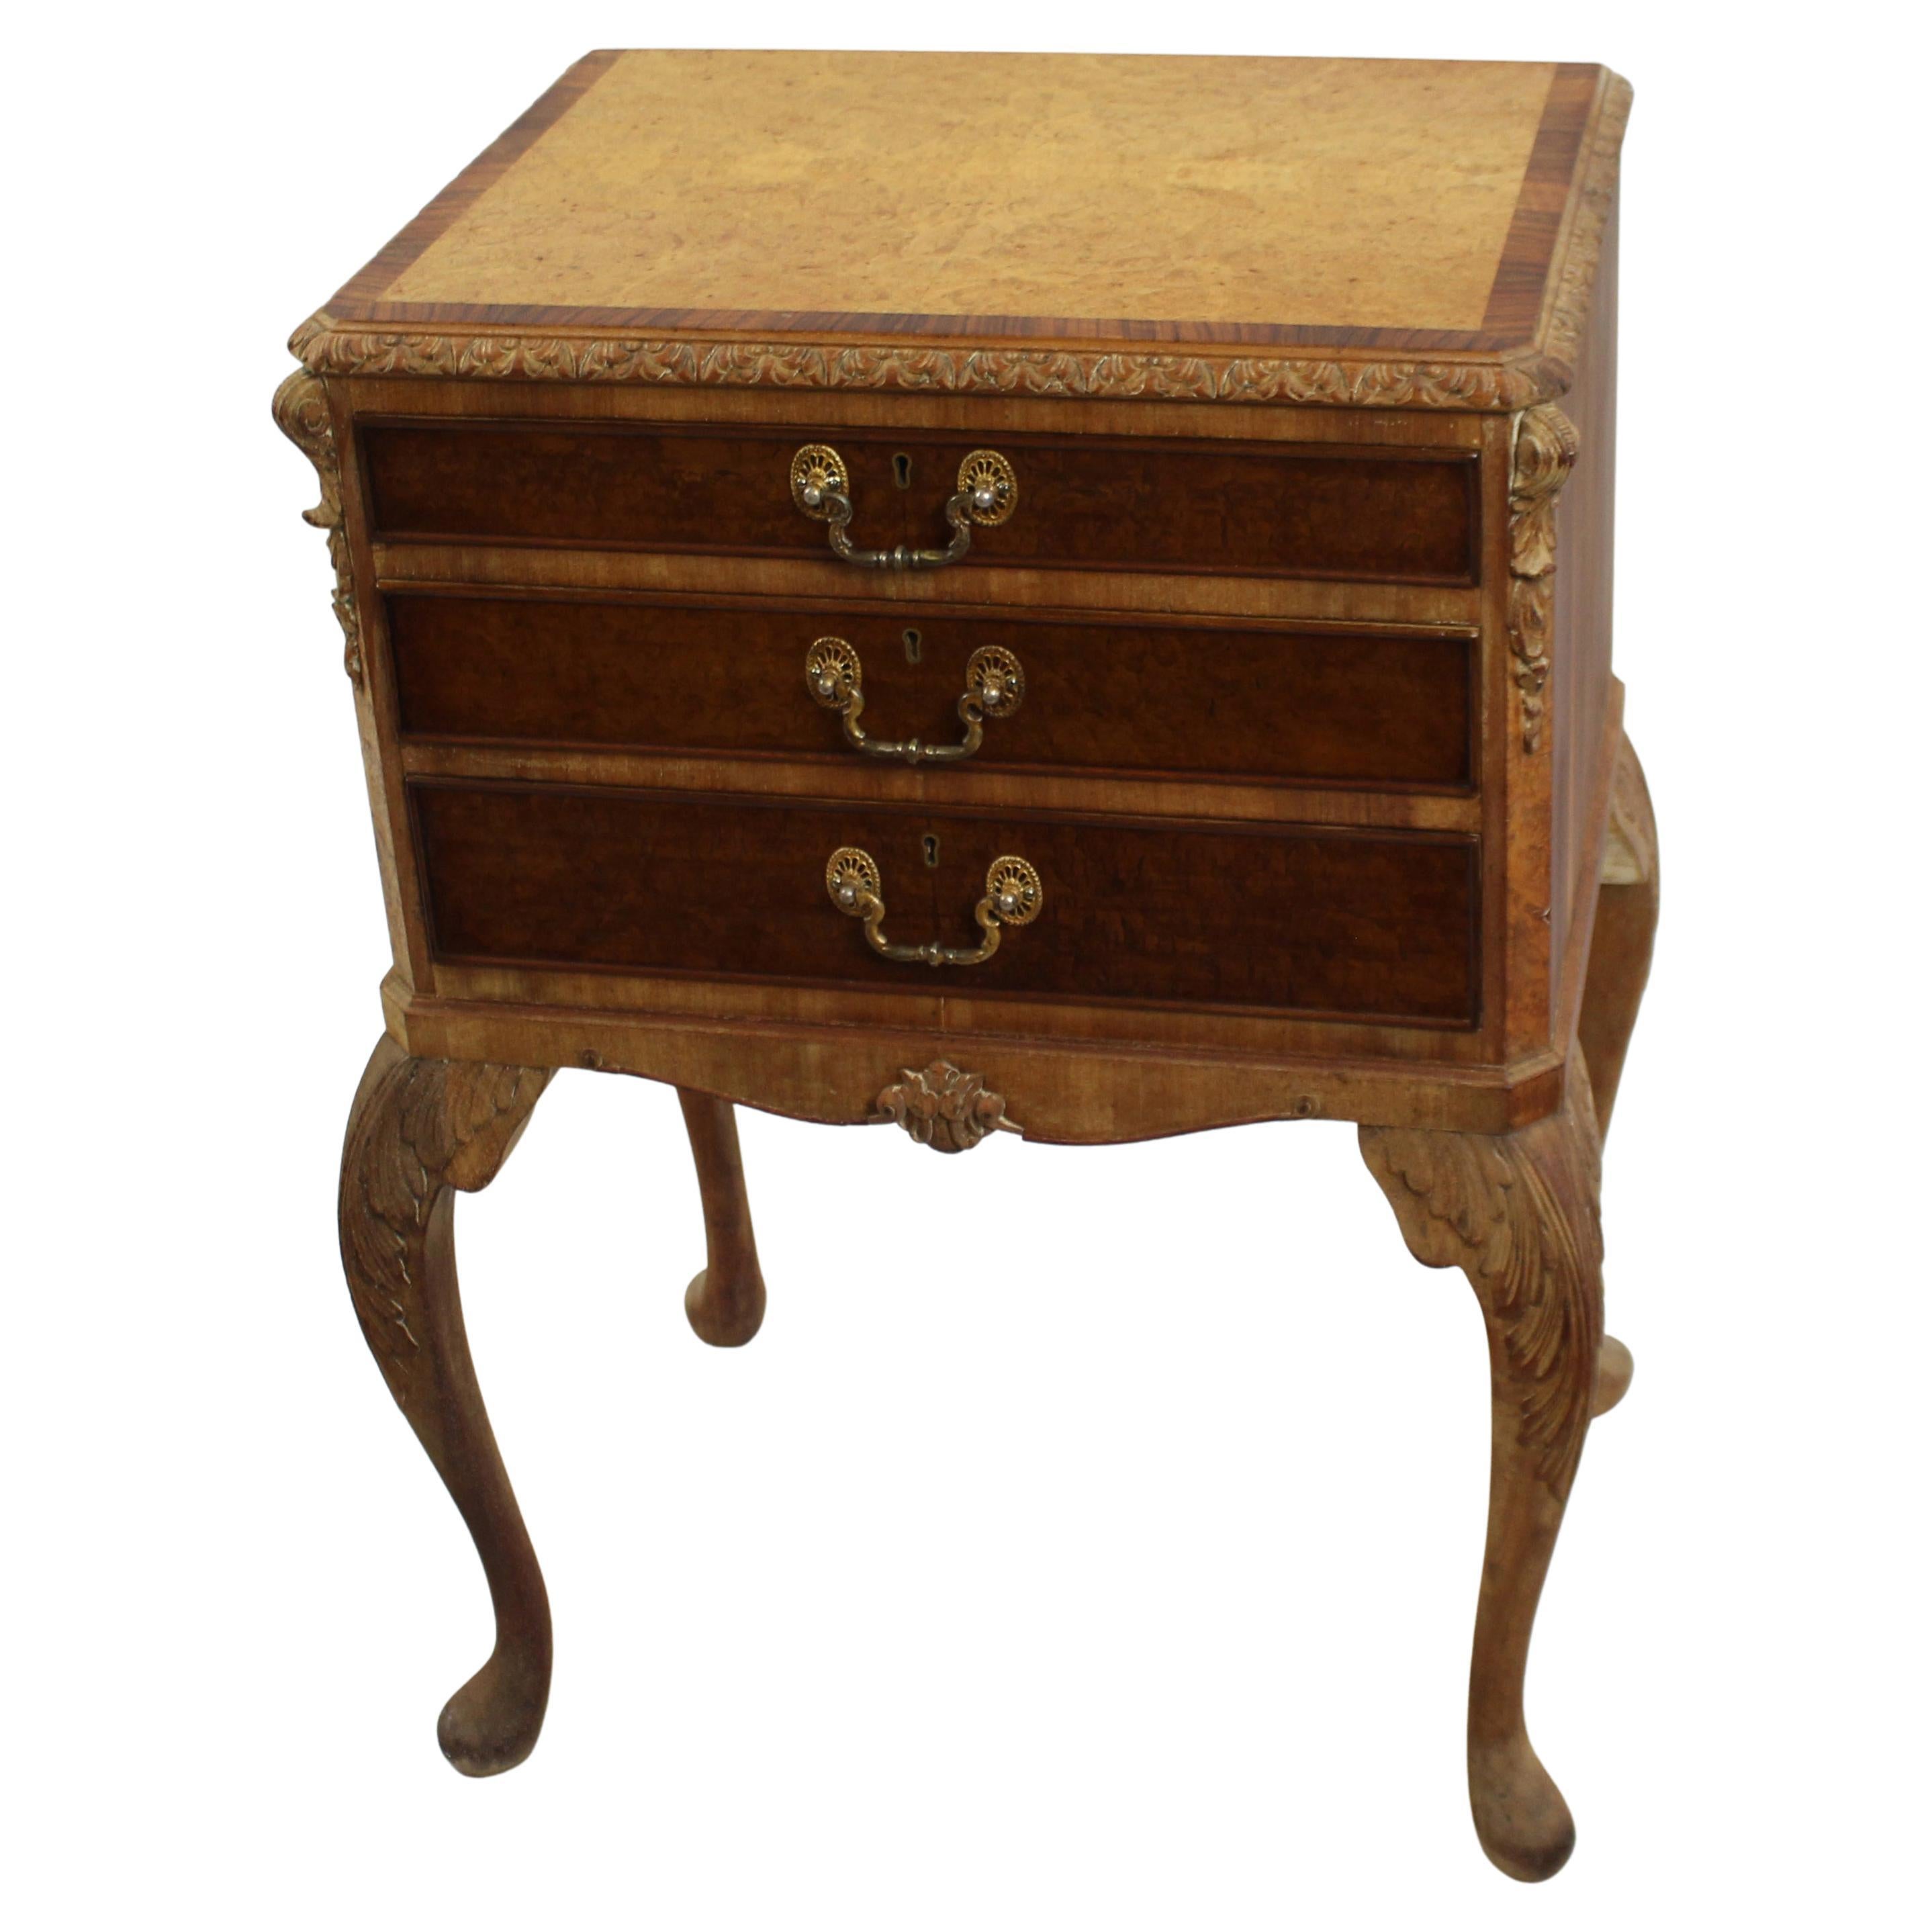 Early 20th C. Carved Walnut Footed Cutlery Chest For Sale